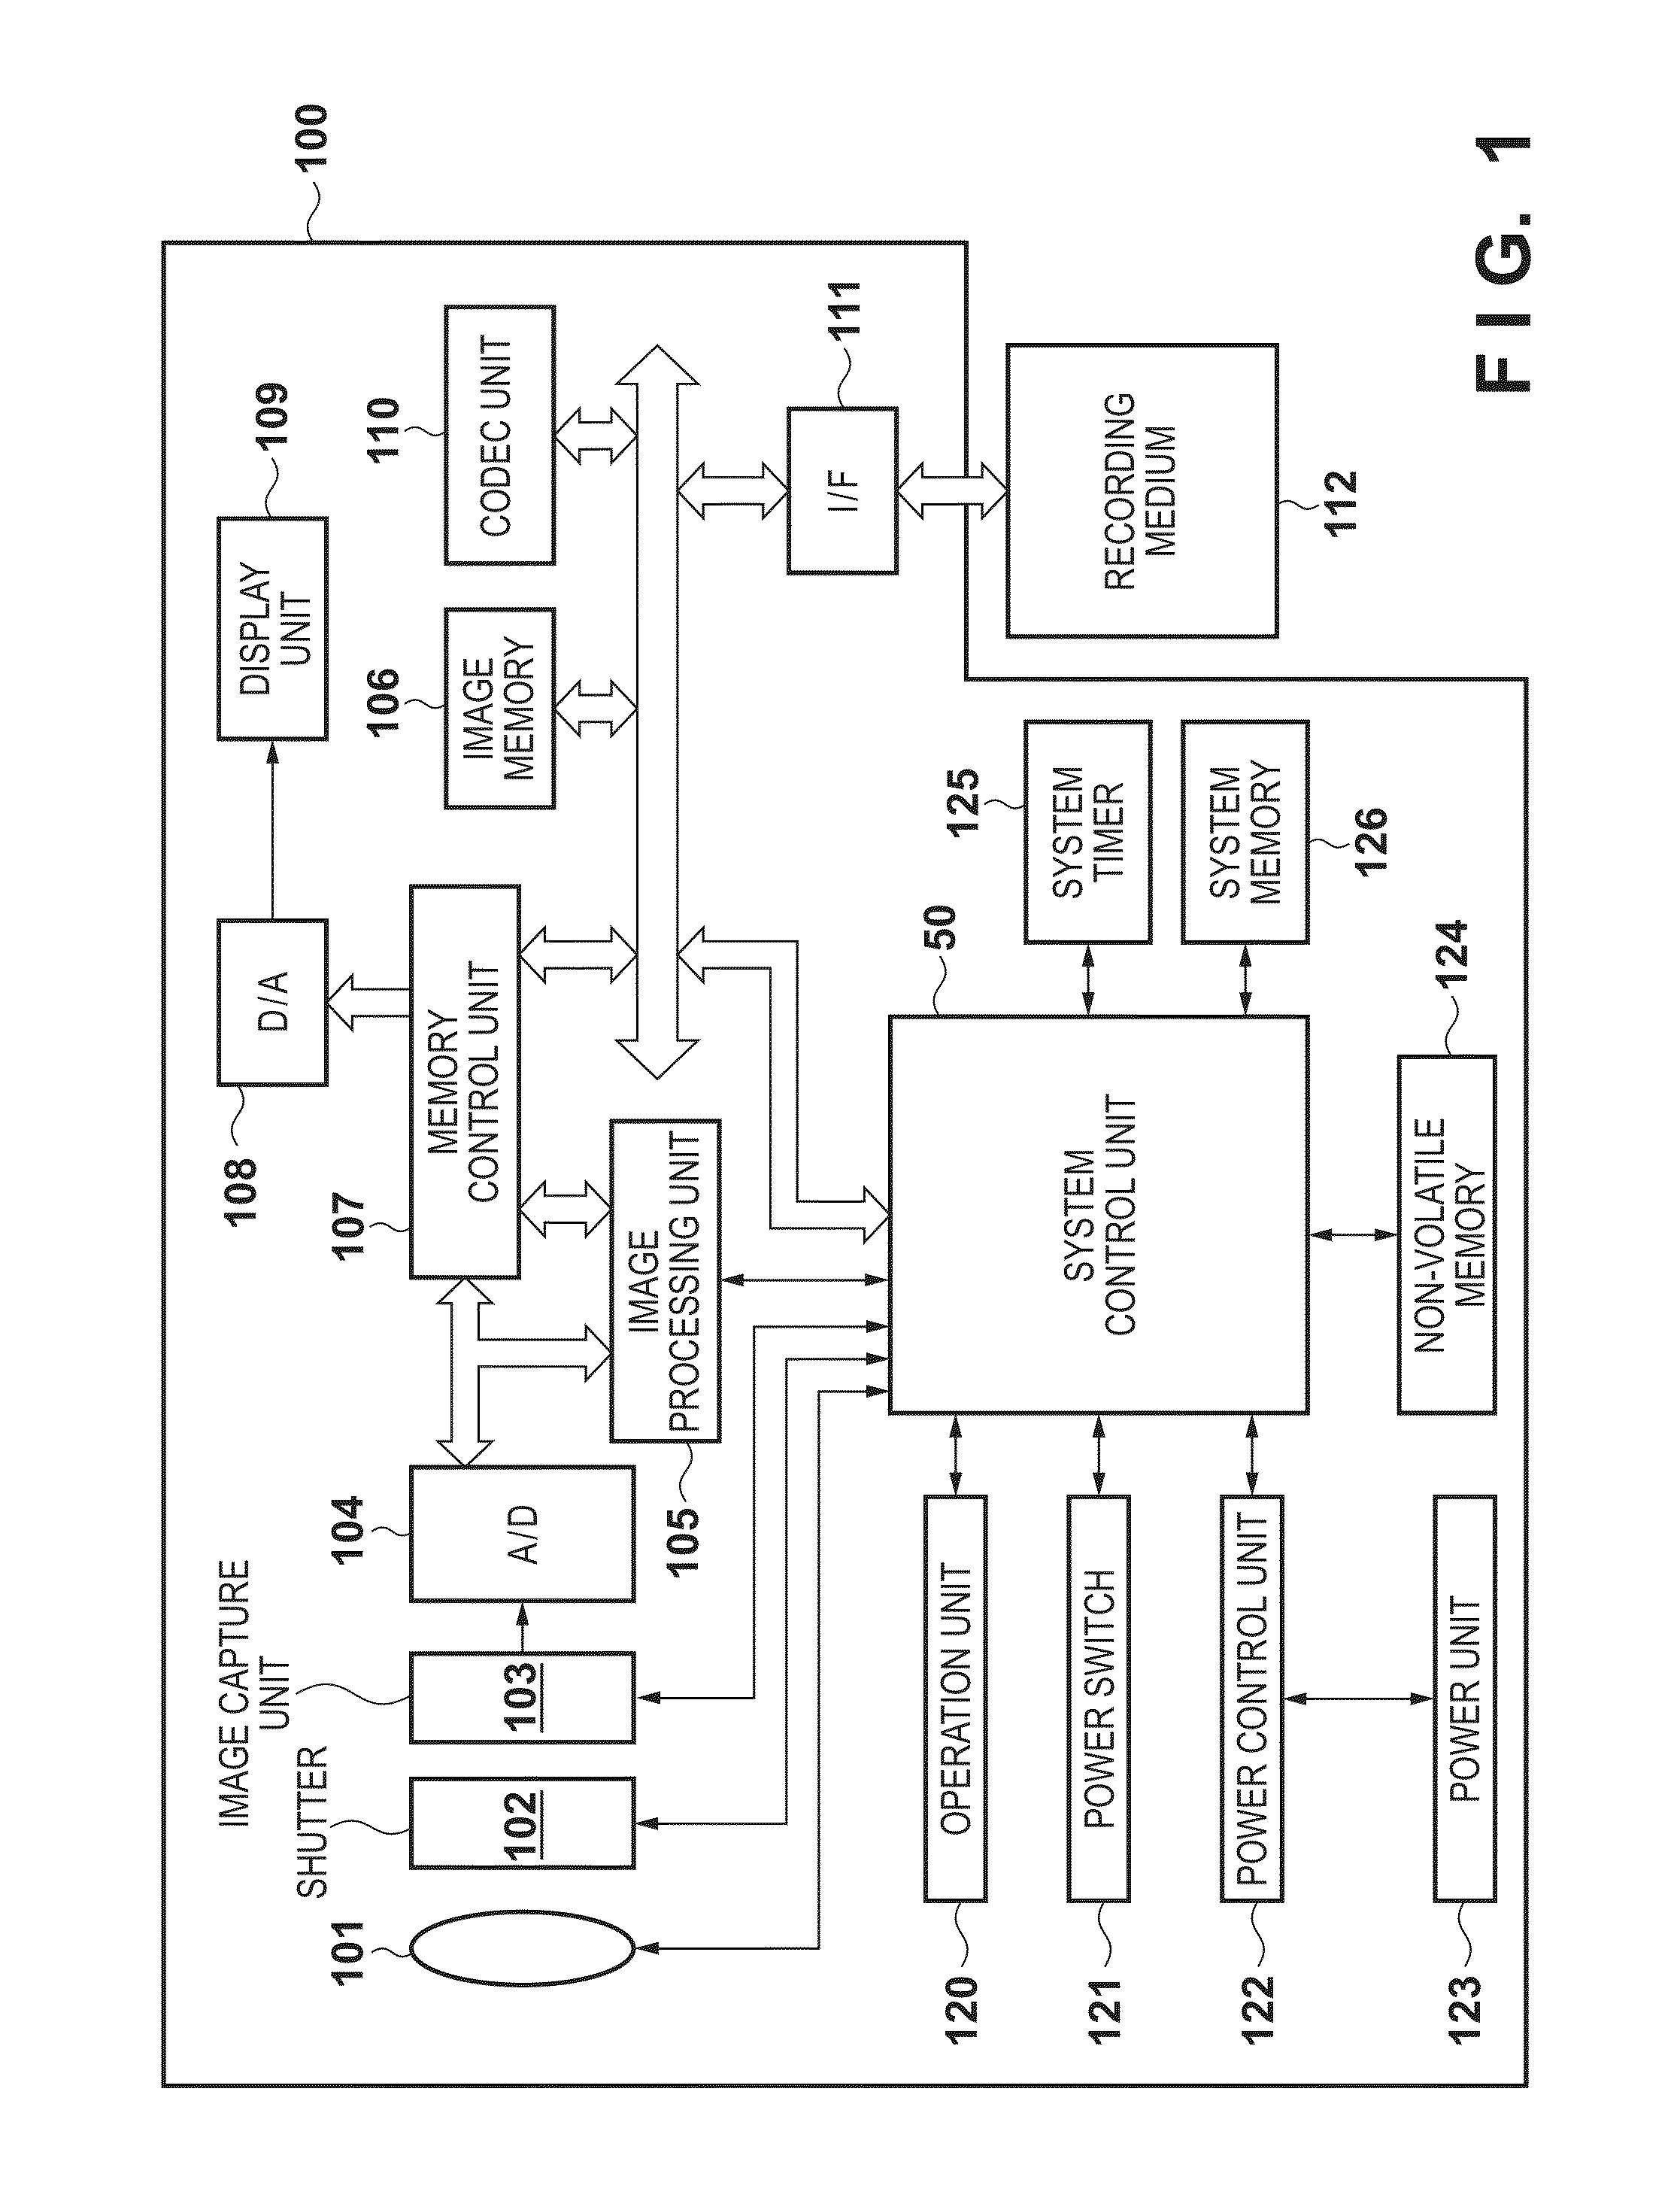 Image processing apparatus and control method therefor